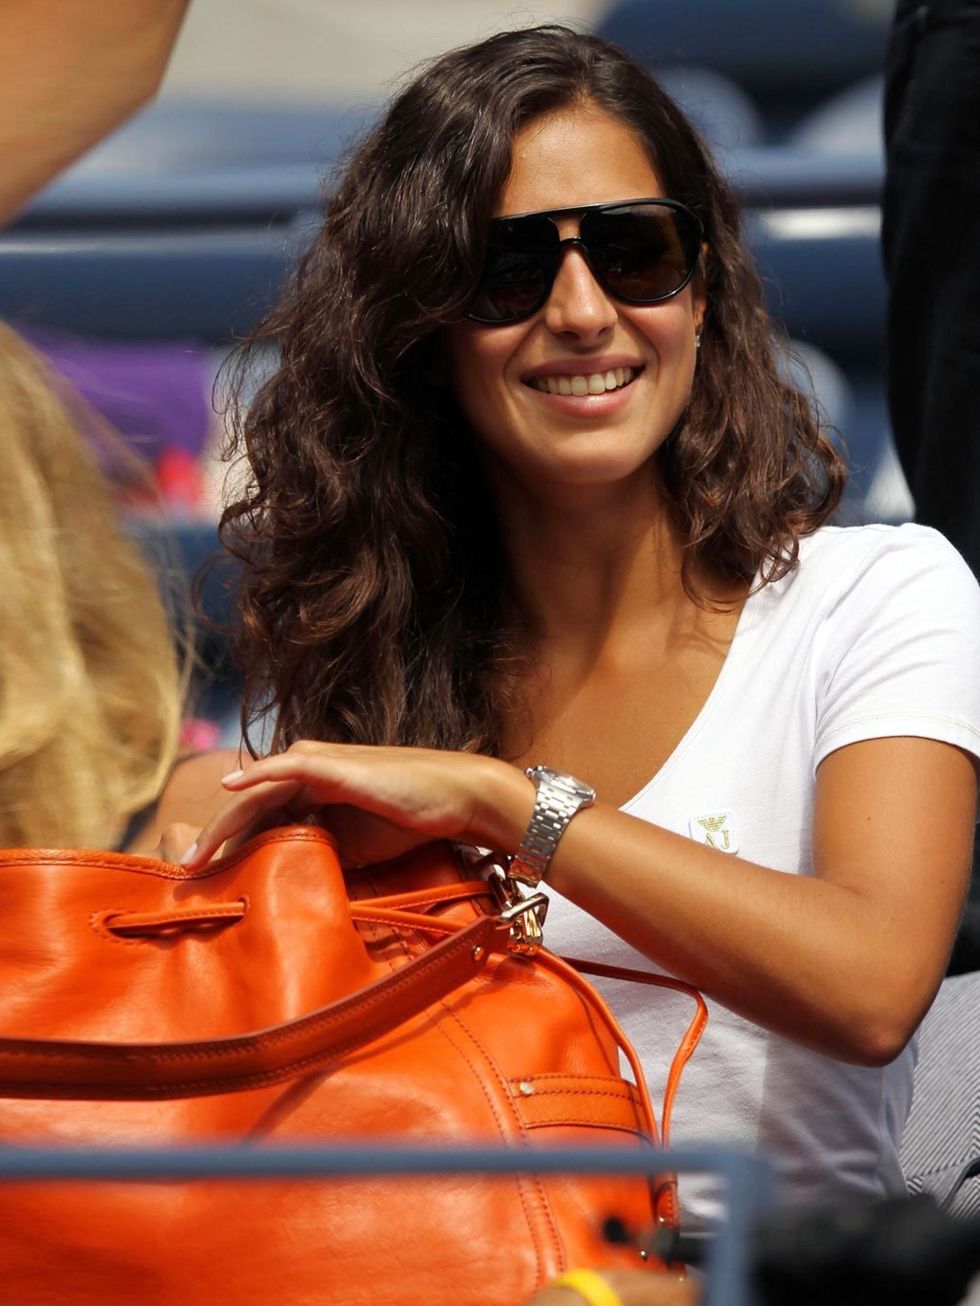 <p><strong>Maria Perello</strong></p><p><strong>WWAG Ranking:</strong> No 3</p><p><strong>Doubles with: </strong>Rafa Nadal</p><p>Perello has been dating Nadal for around 8 years. With naturally curly hair and a bikini body to die for Perello comes in on 